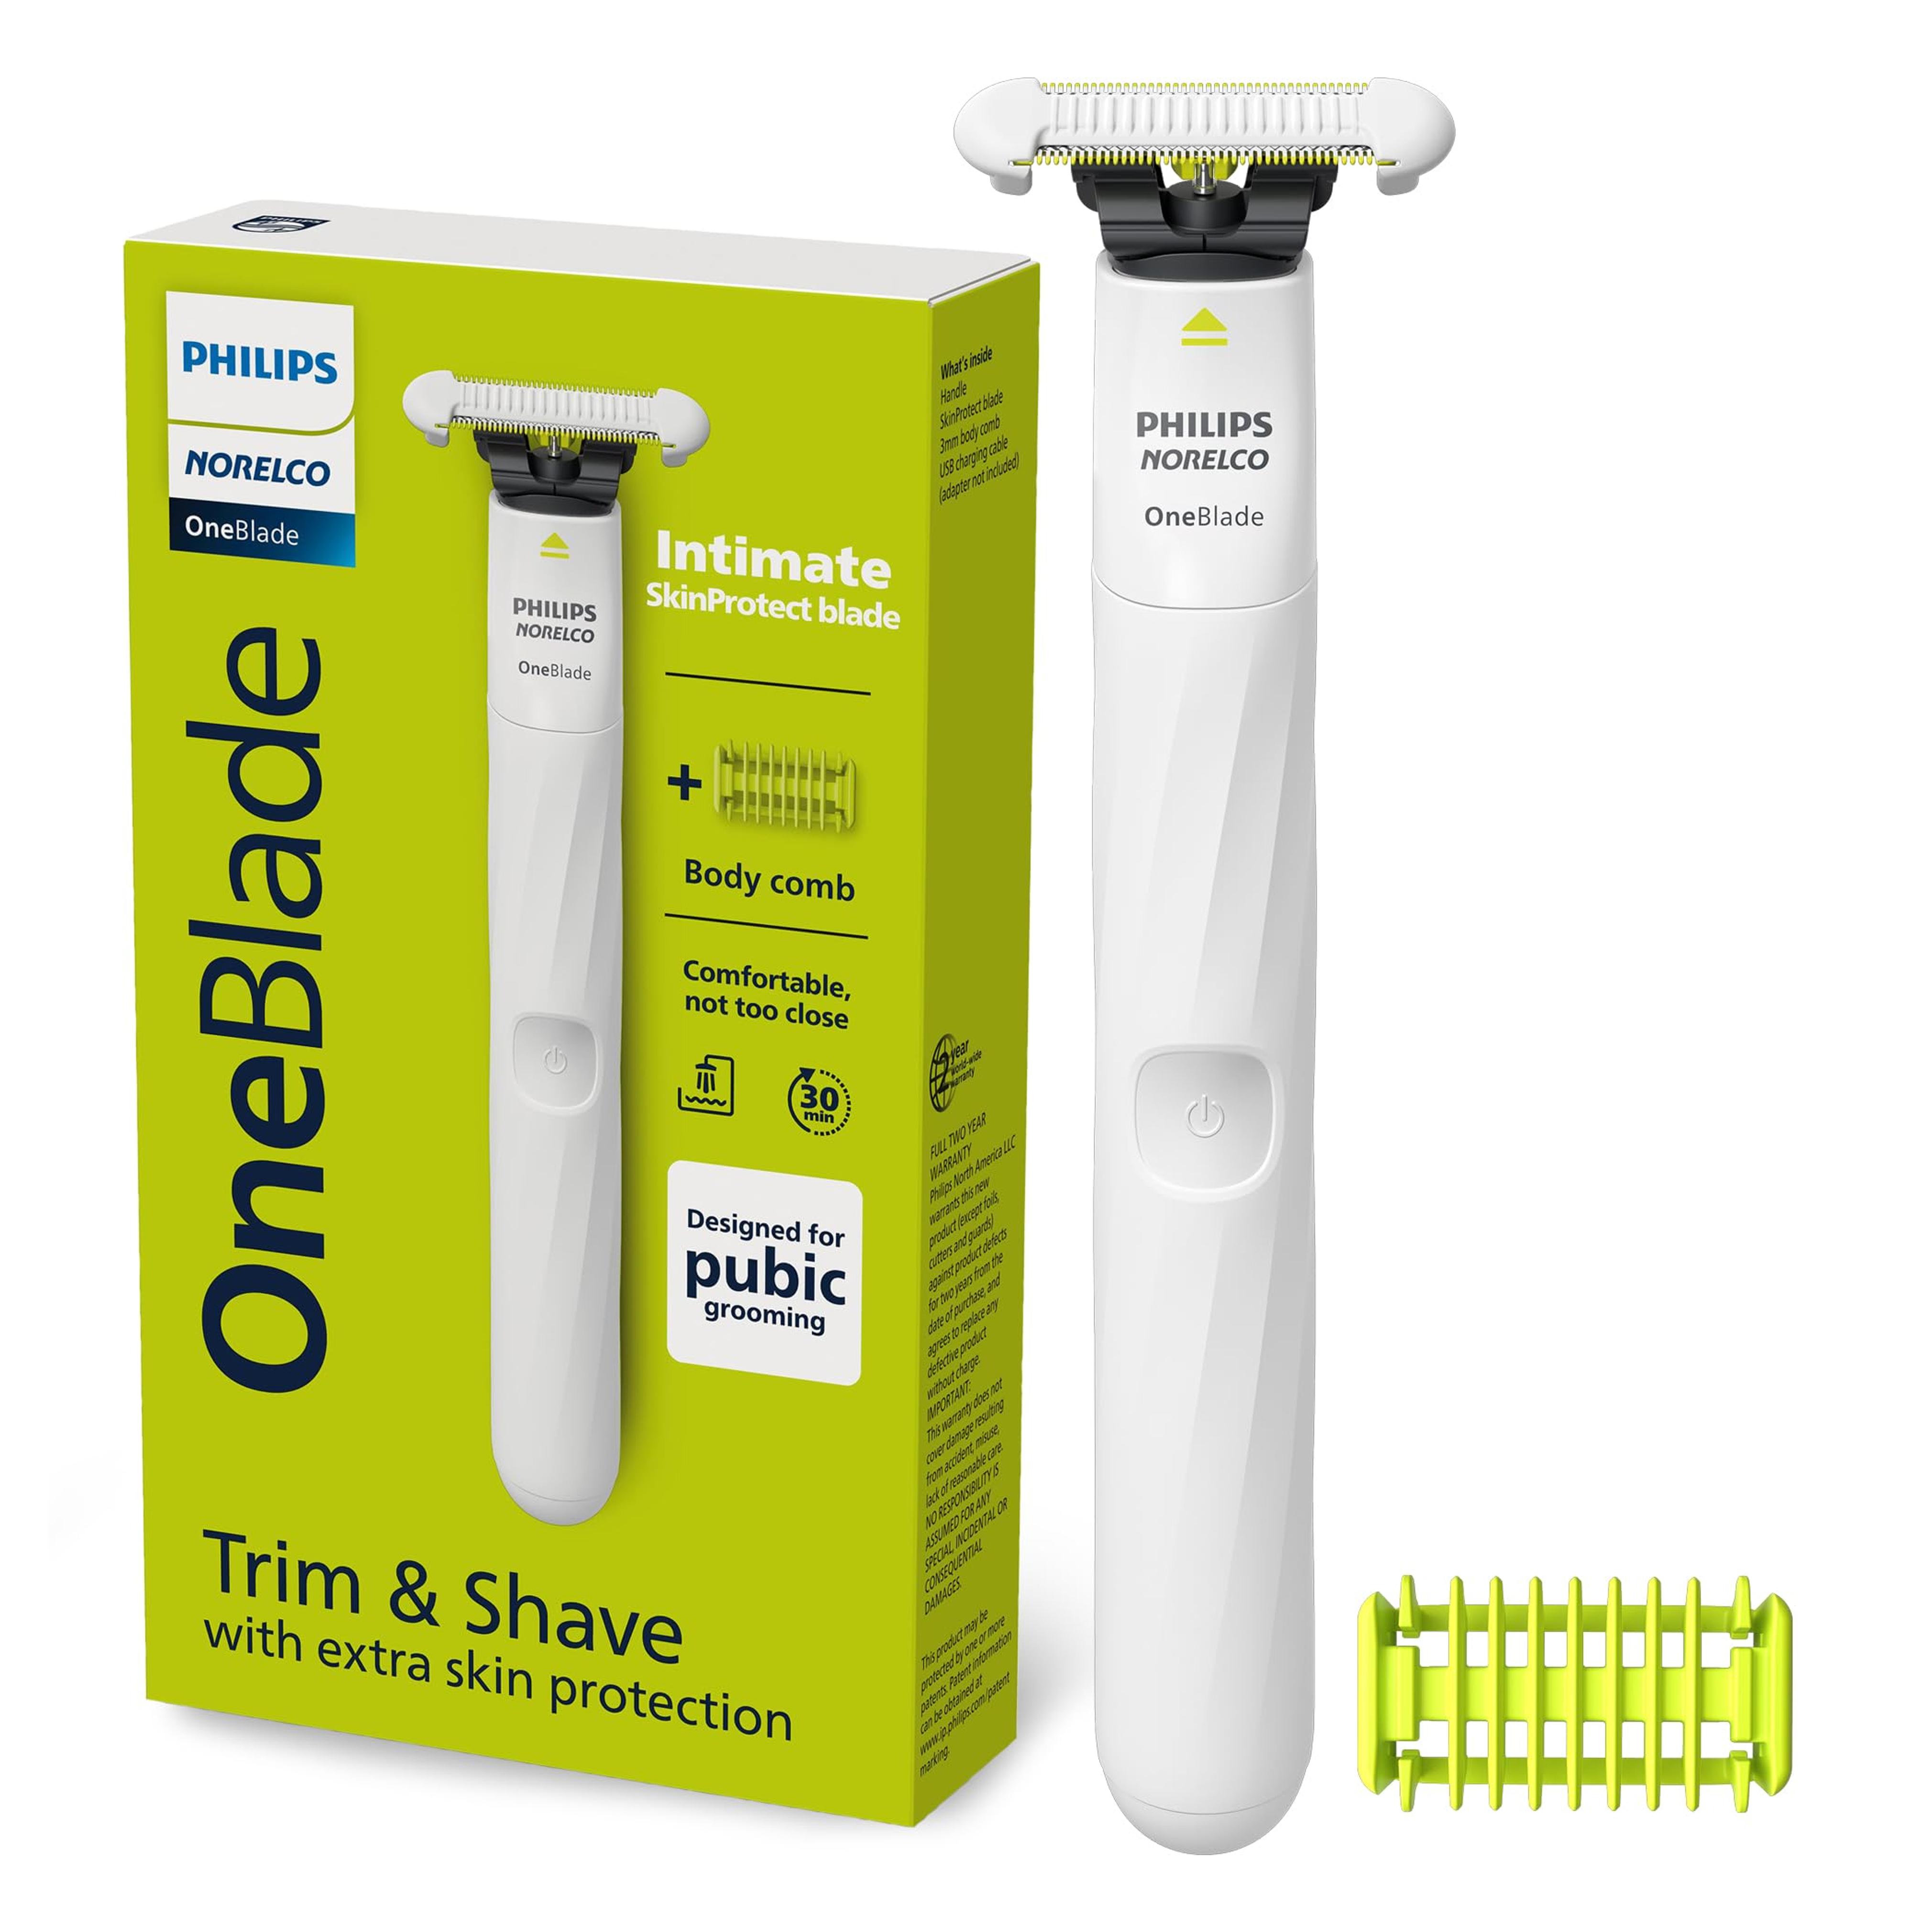 Amazon.com: Philips Norelco OneBlade Unisex Intimate Pubic & Personal Body Groomer & Trimmer, QP1924/70 : Beauty & Personal Care